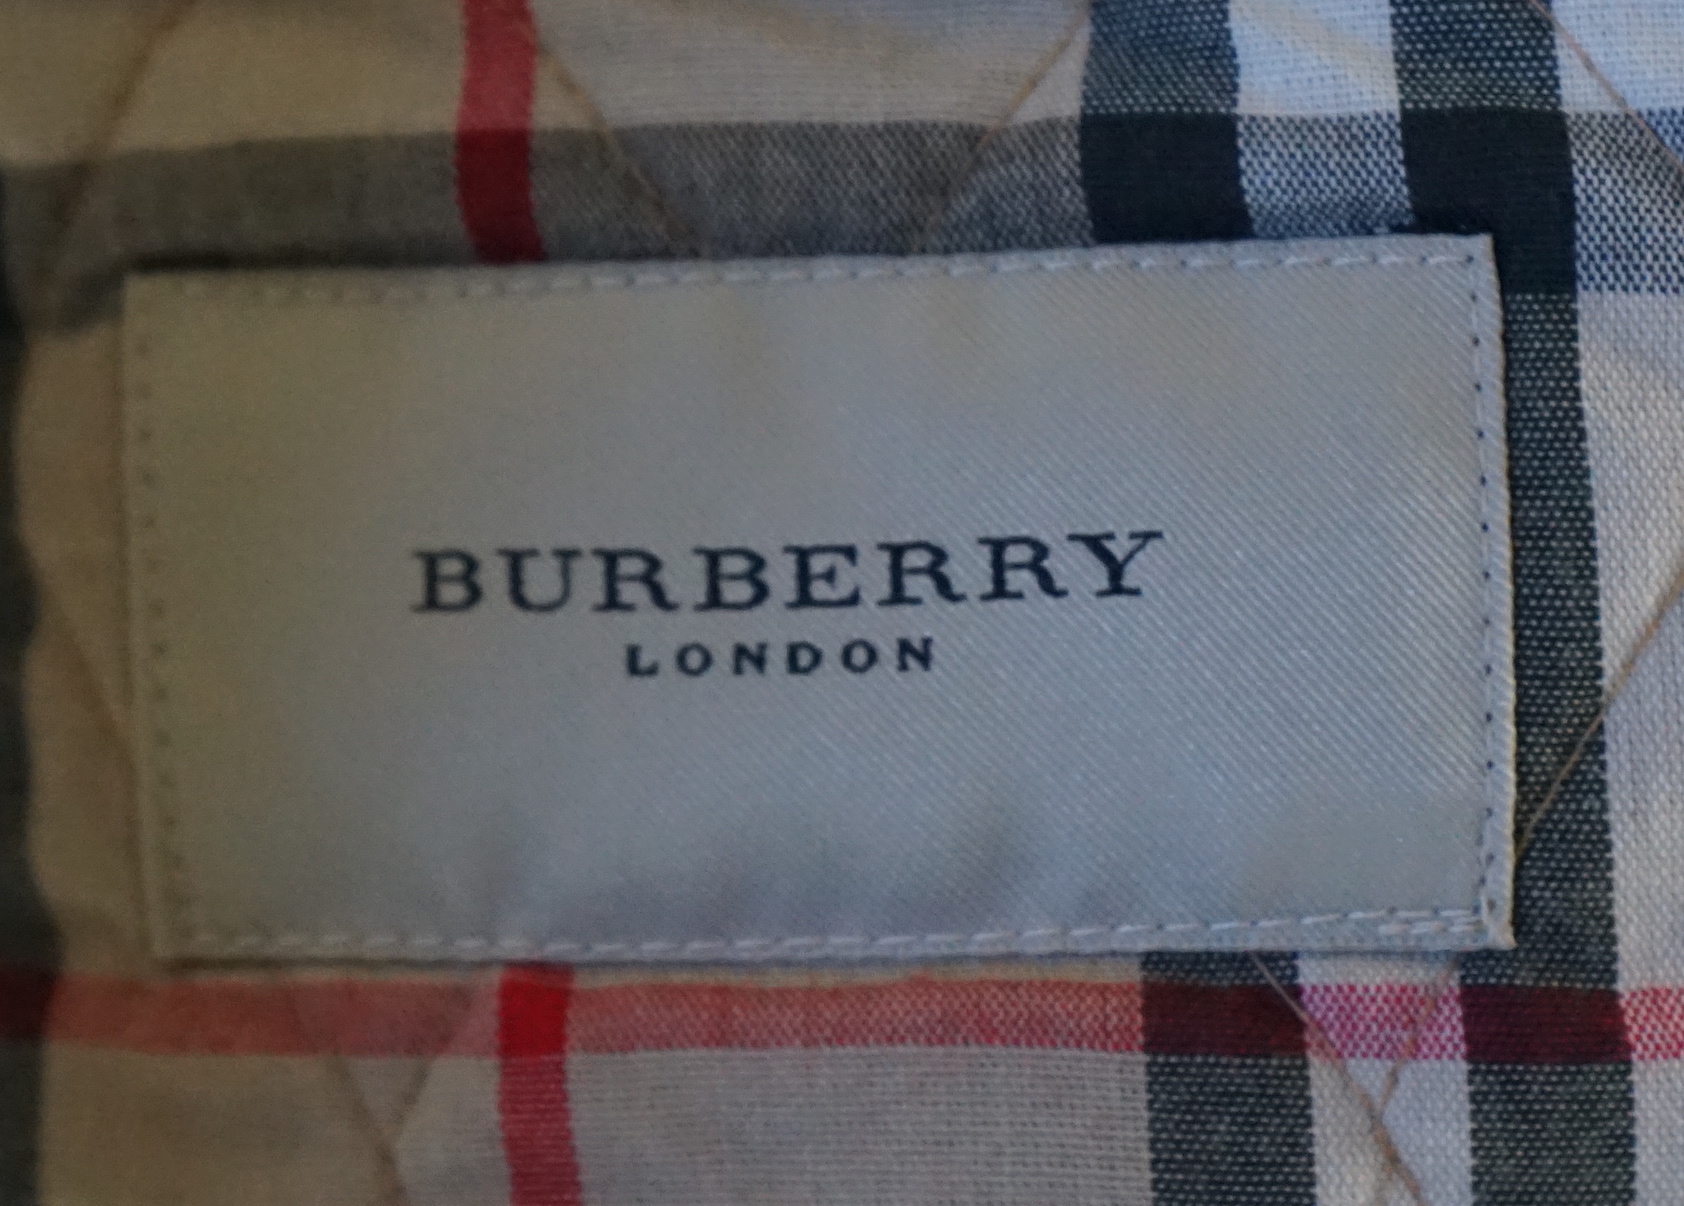 Two Burberry lady's quilted jackets, one pink and the other green, size Medium